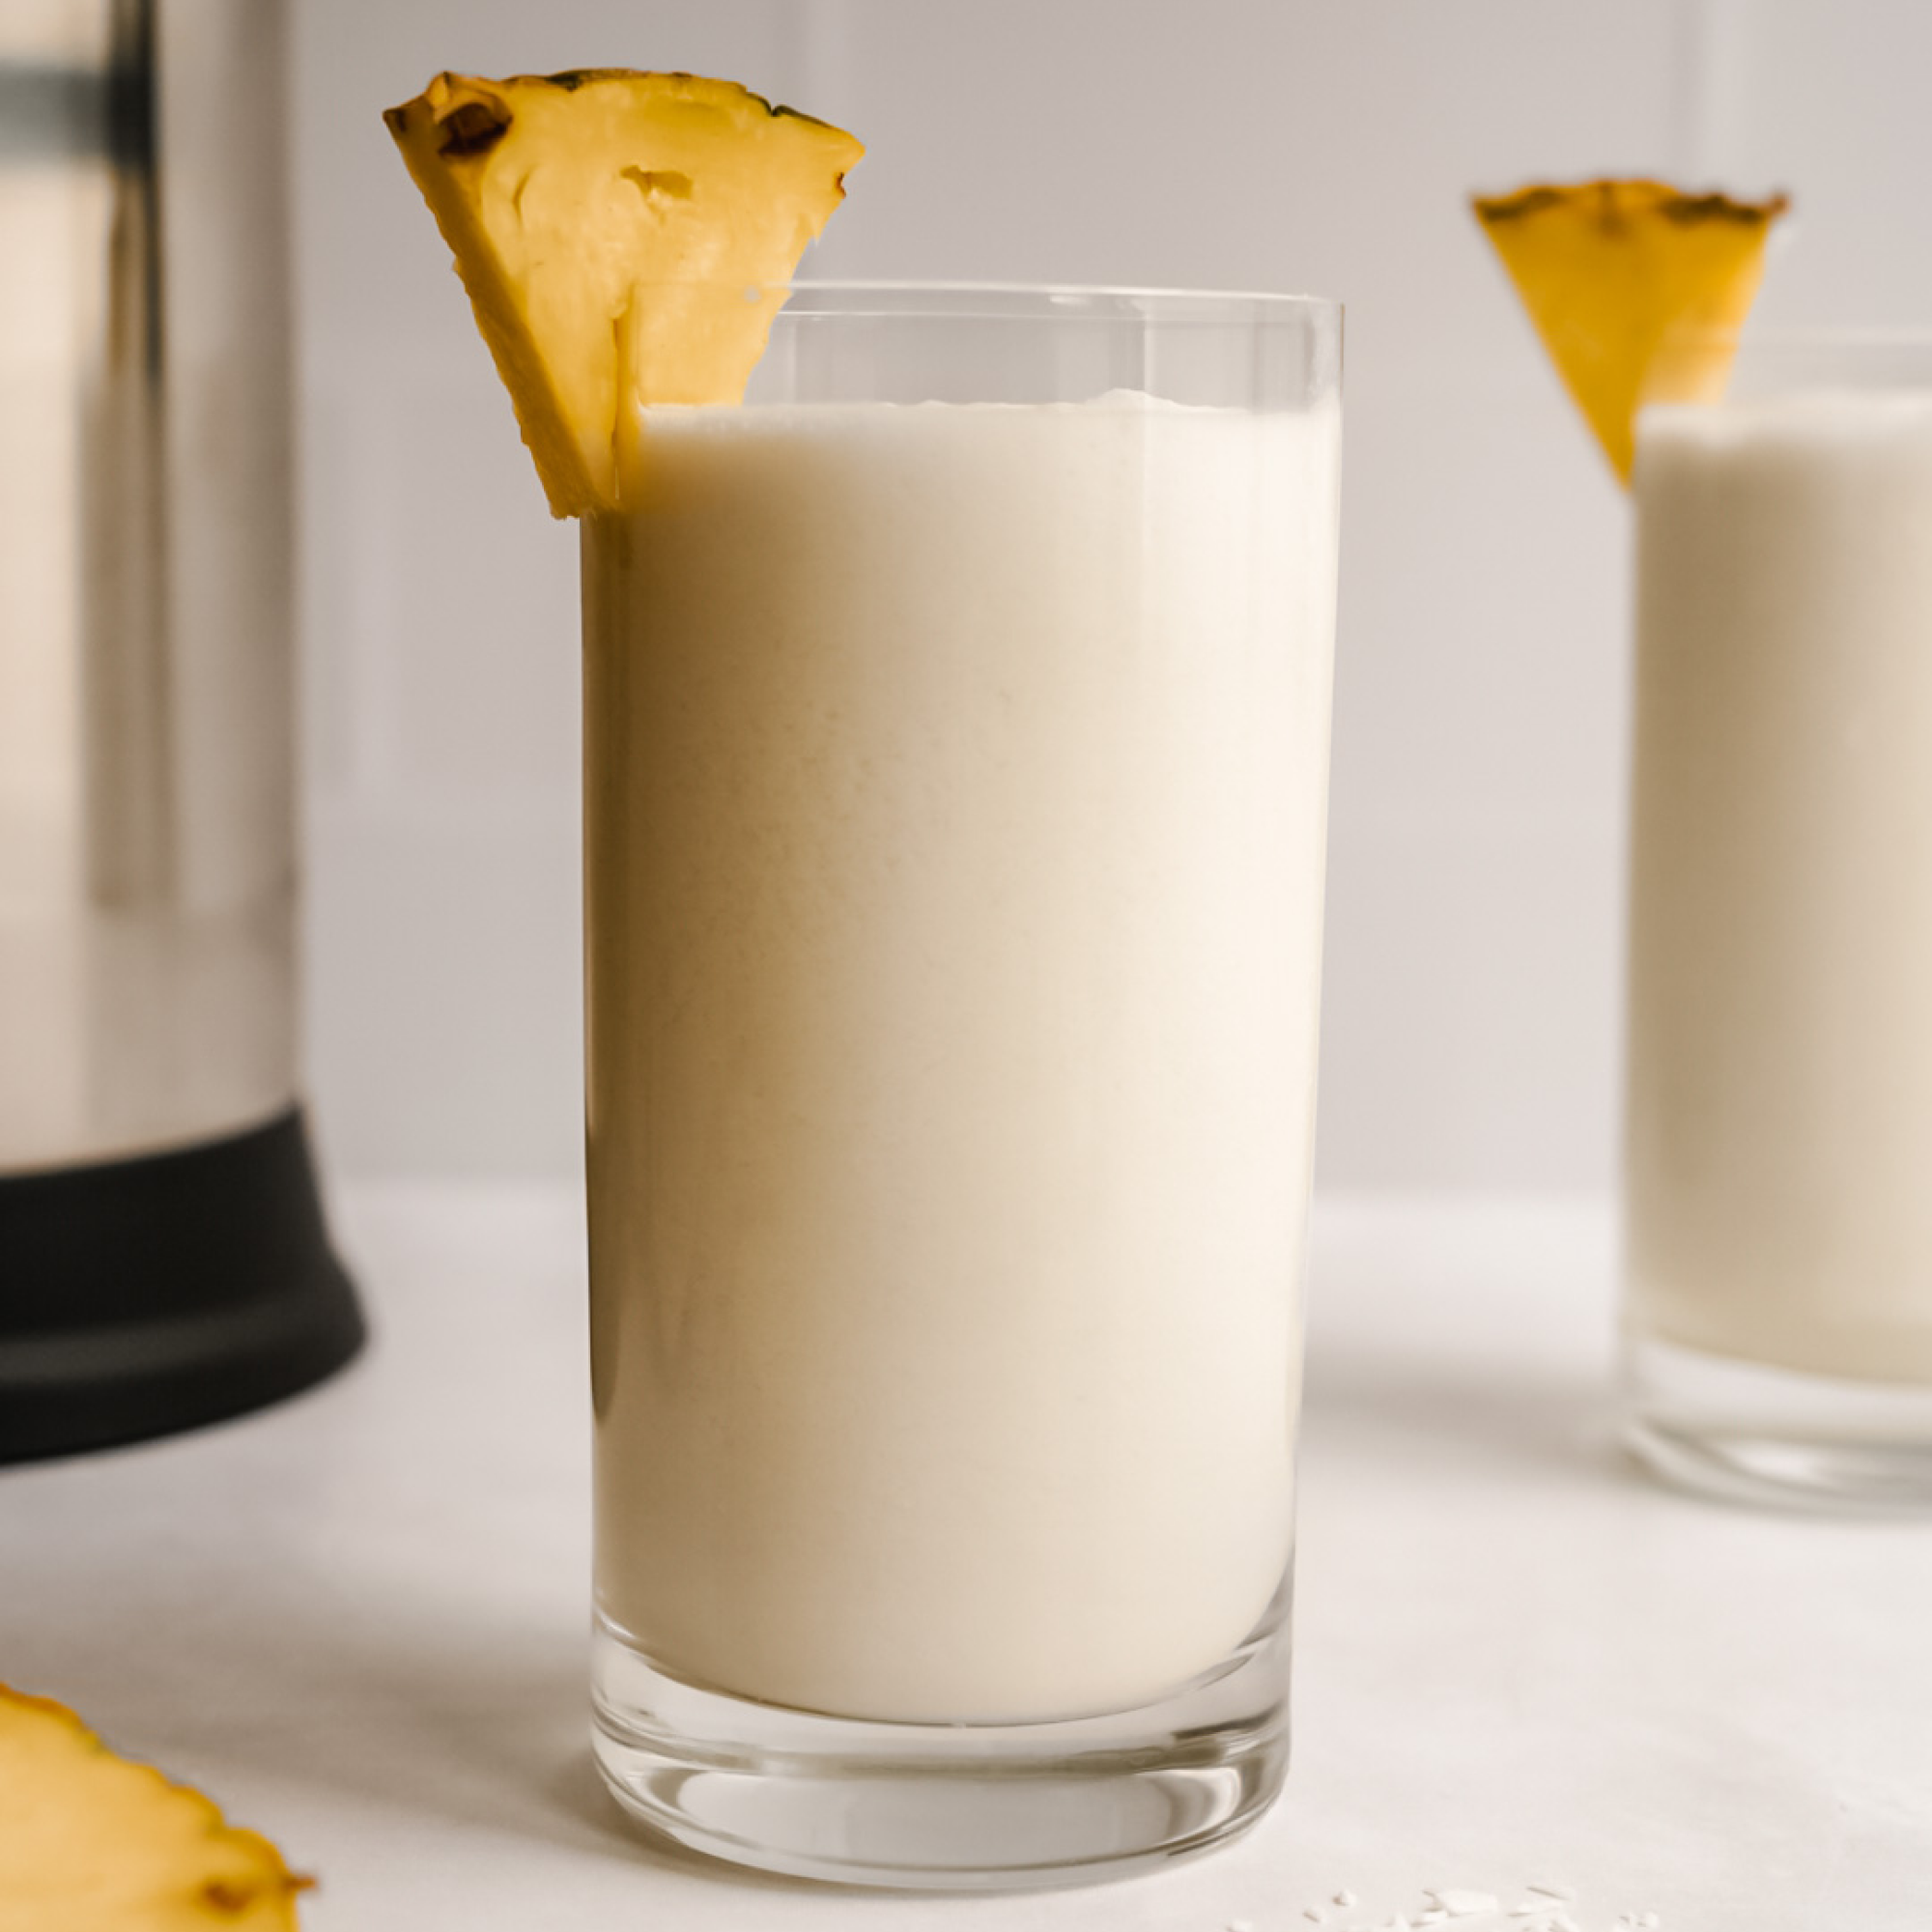 Delicious and easy-to-make Pineapple Coconut Milk using Almond Cow machine